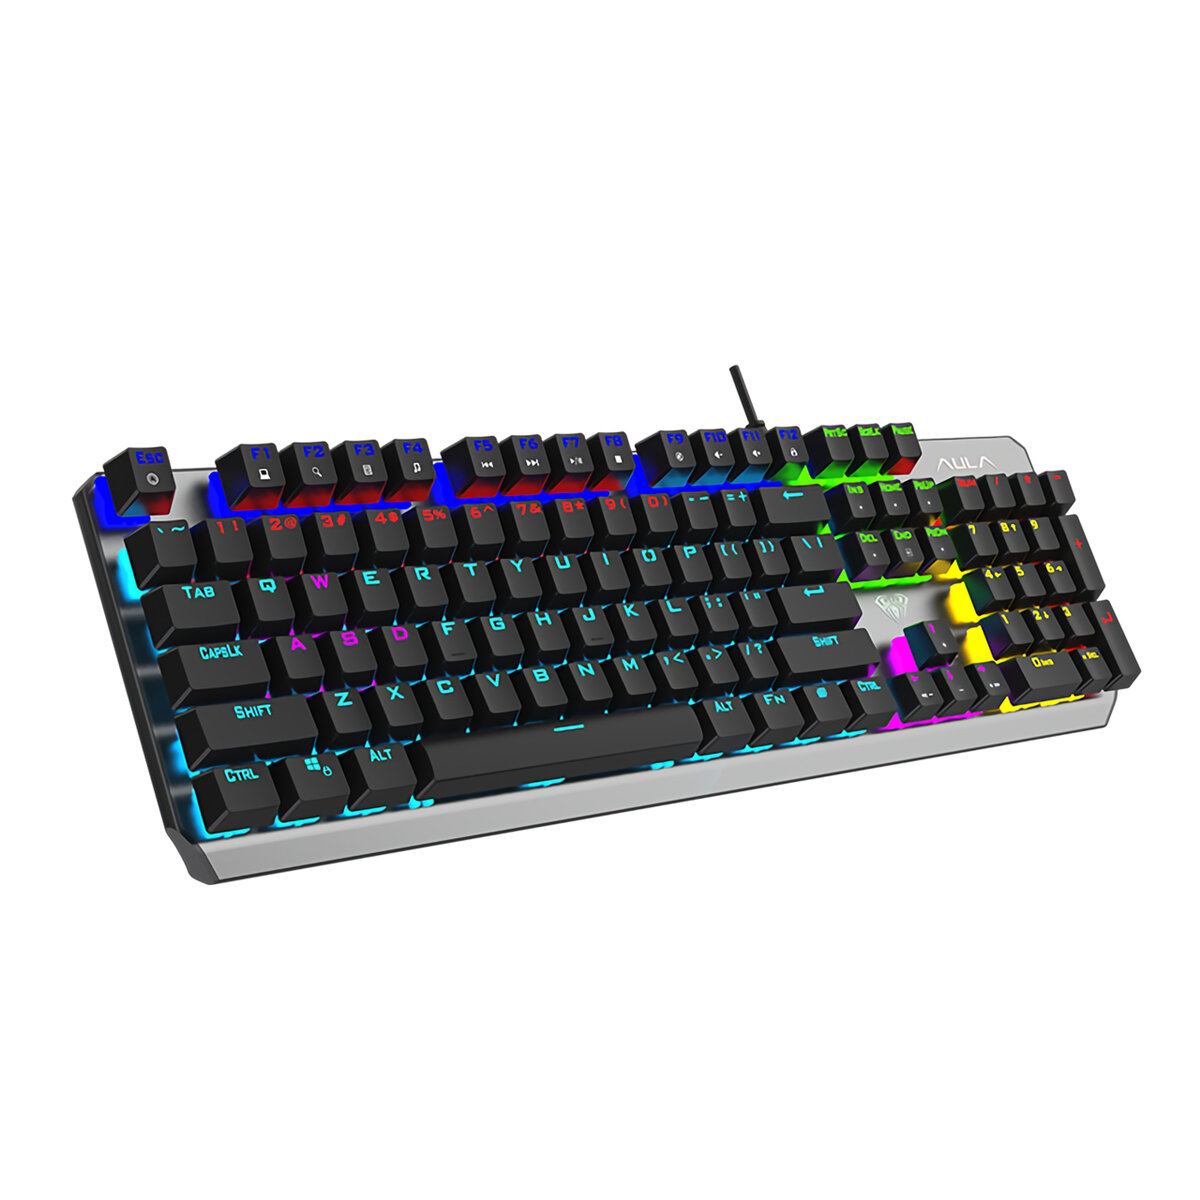 

AULA F2066-Ⅱ 104 Keys Mechanical Keyboard USB Wired Blue Switch LED Backlit Gaming Keyboard for PC Laptops Gamers